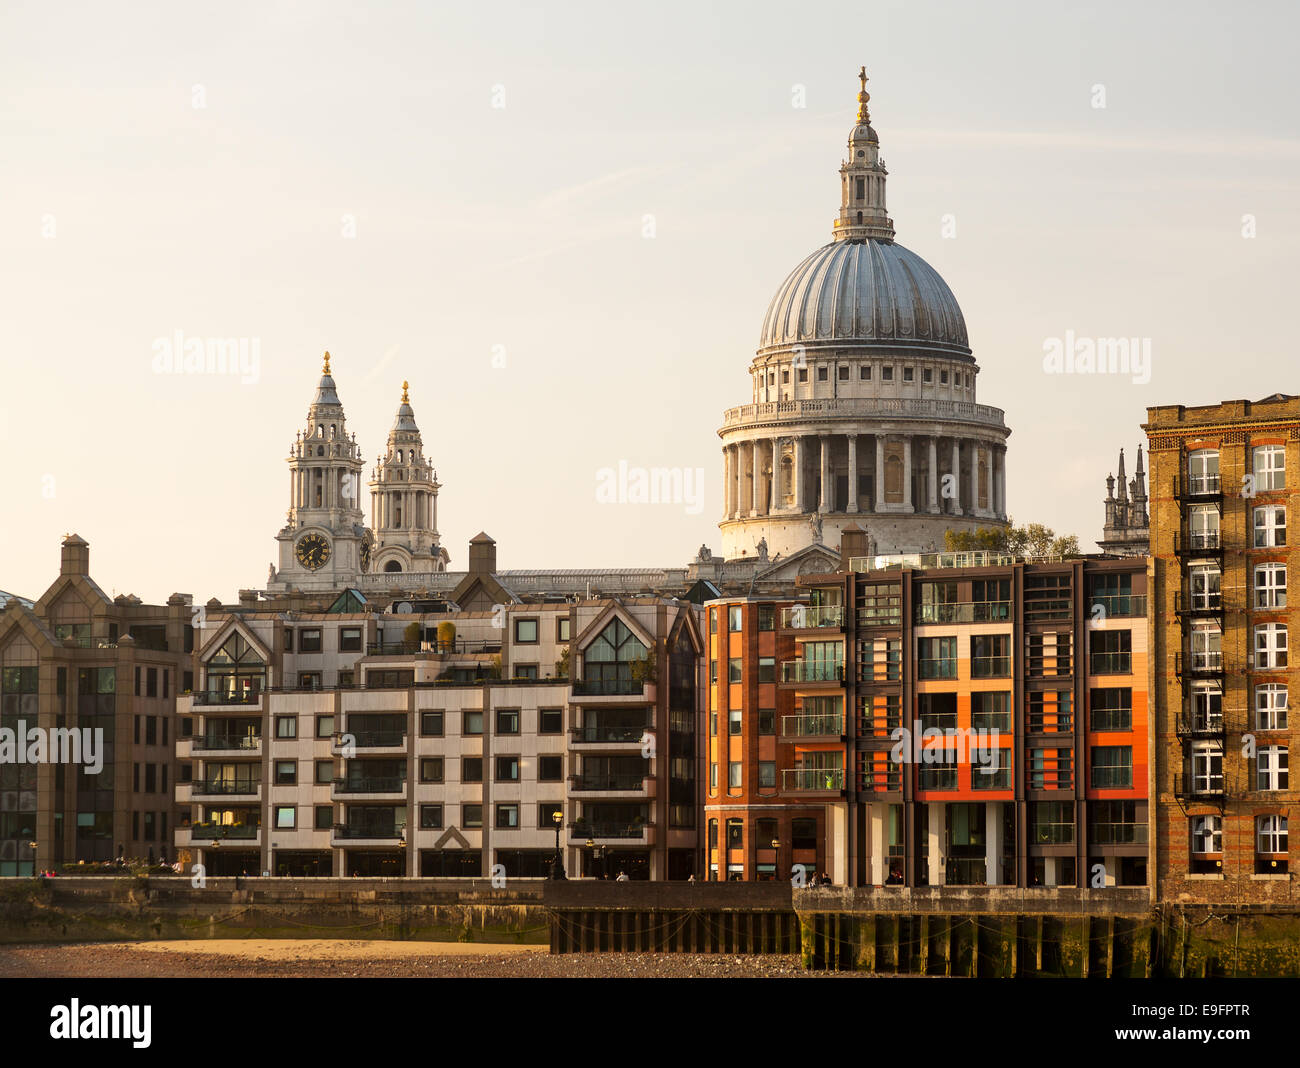 St Pauls Cathedral Church London England Stock Photo